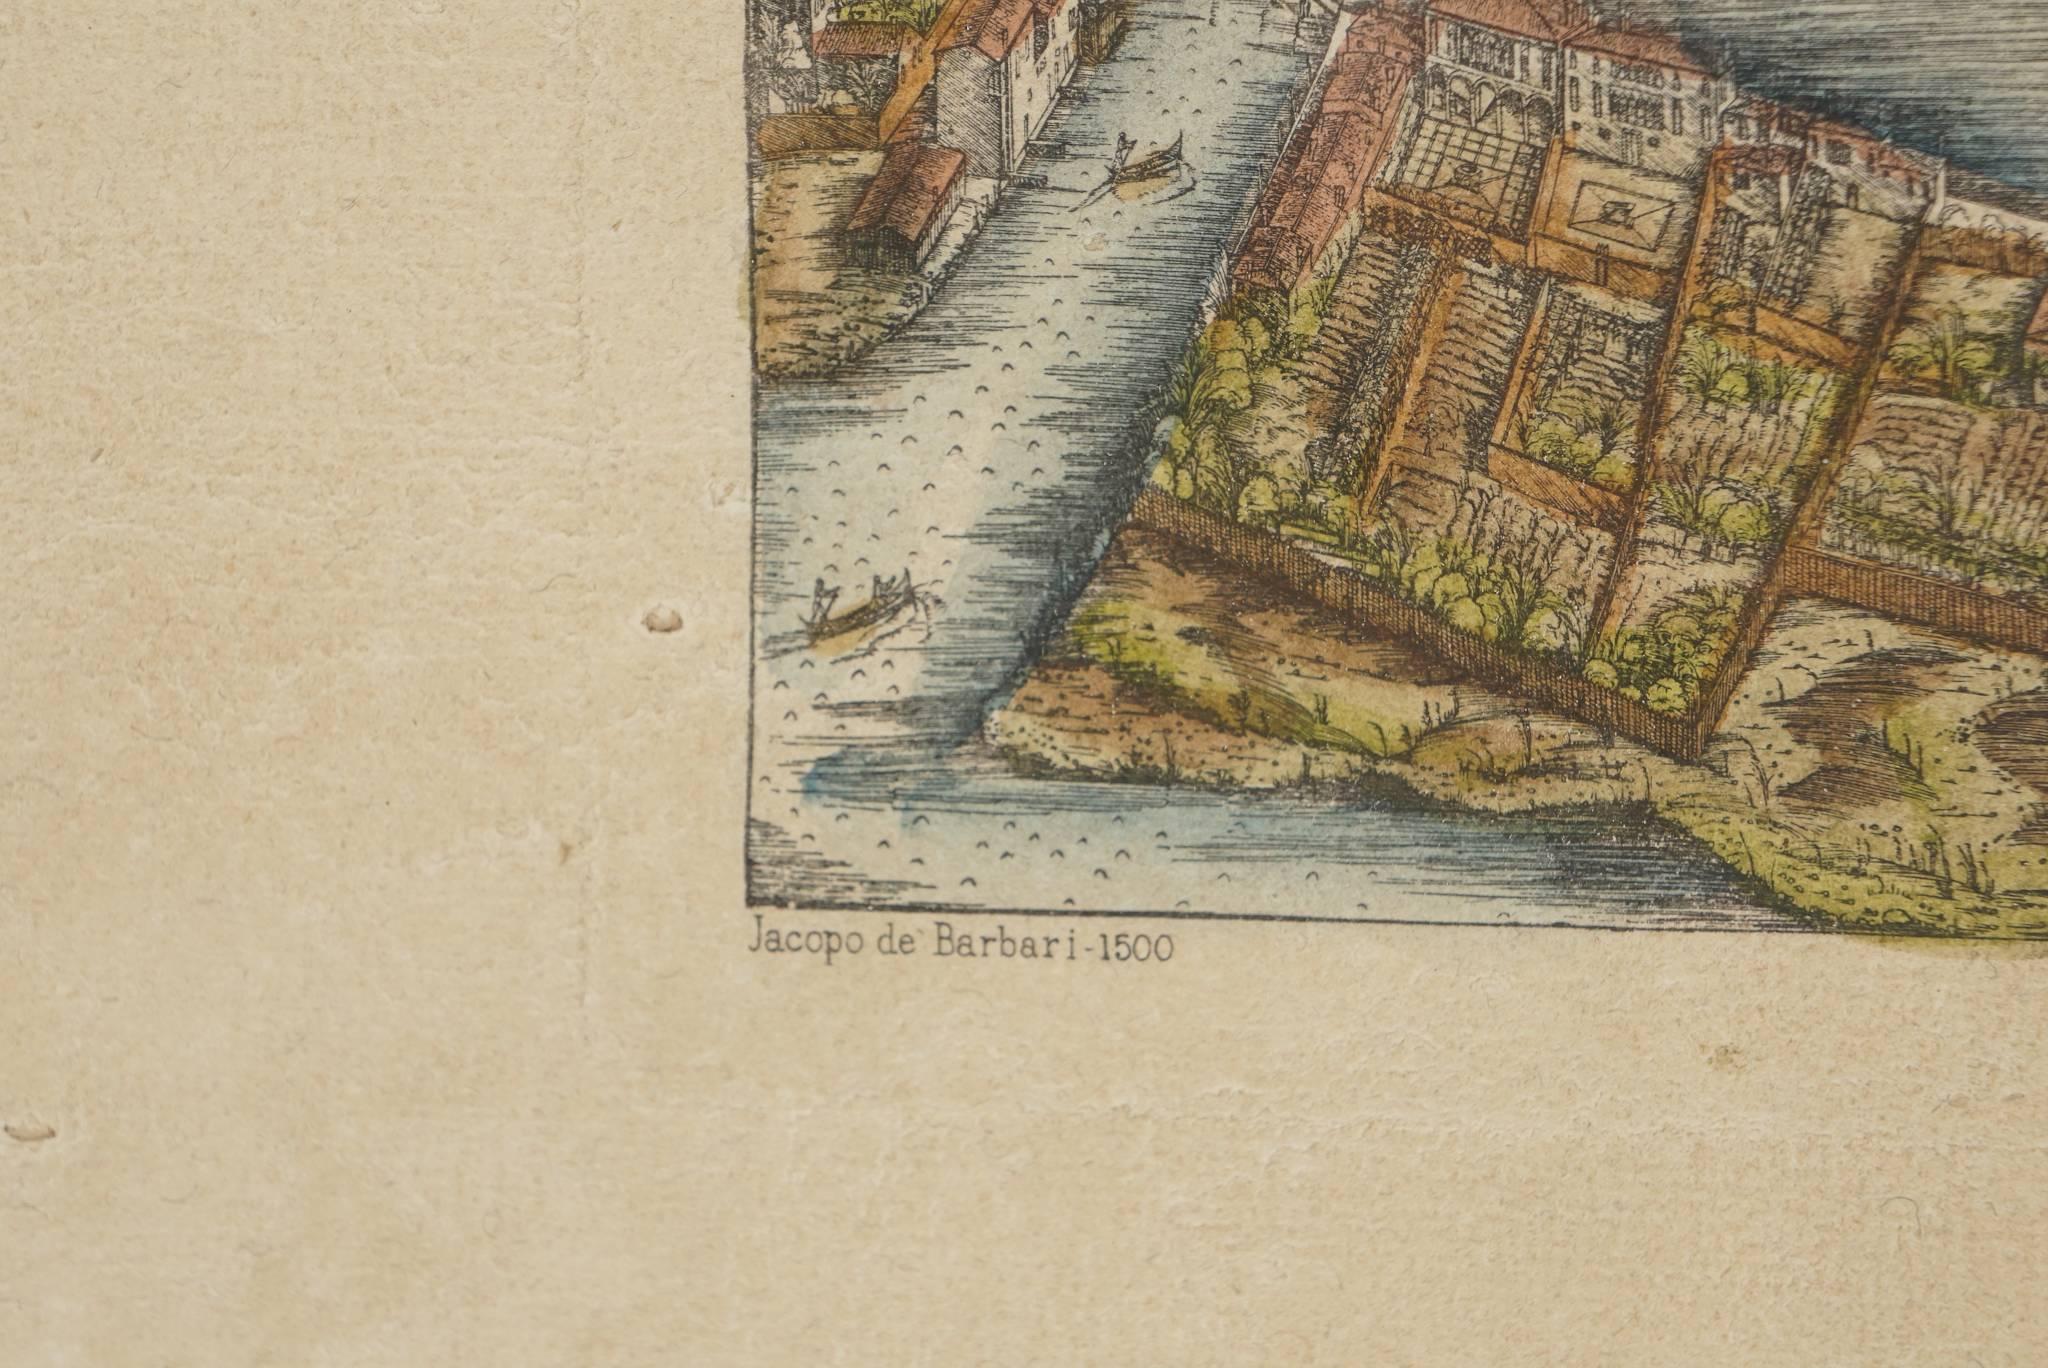 Painted Hand-Colored 18th Century Printing of Jacopo De Barbari's Map of Venice 